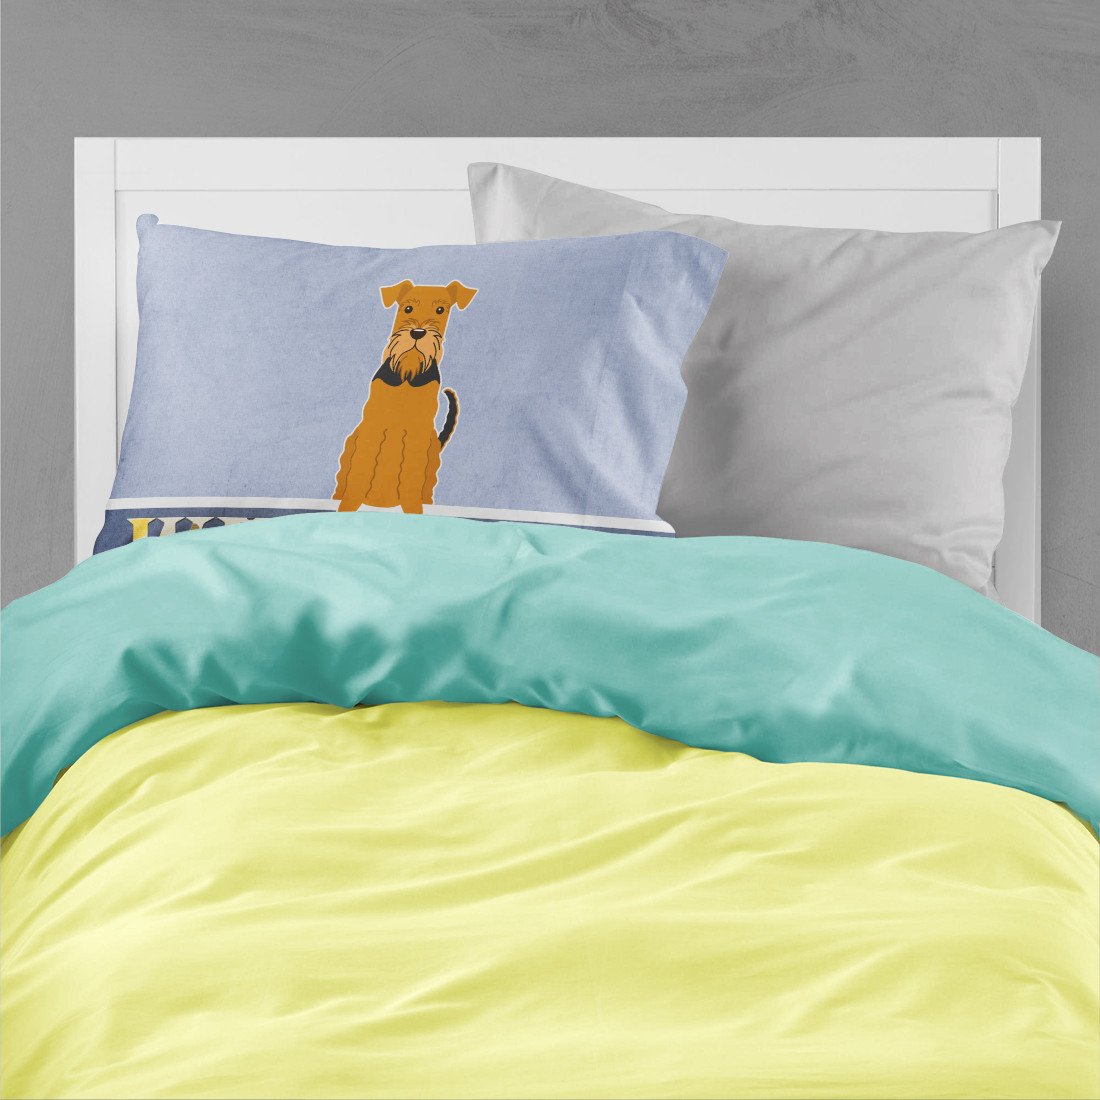 Airedale Welcome Fabric Standard Pillowcase BB5622PILLOWCASE by Caroline's Treasures